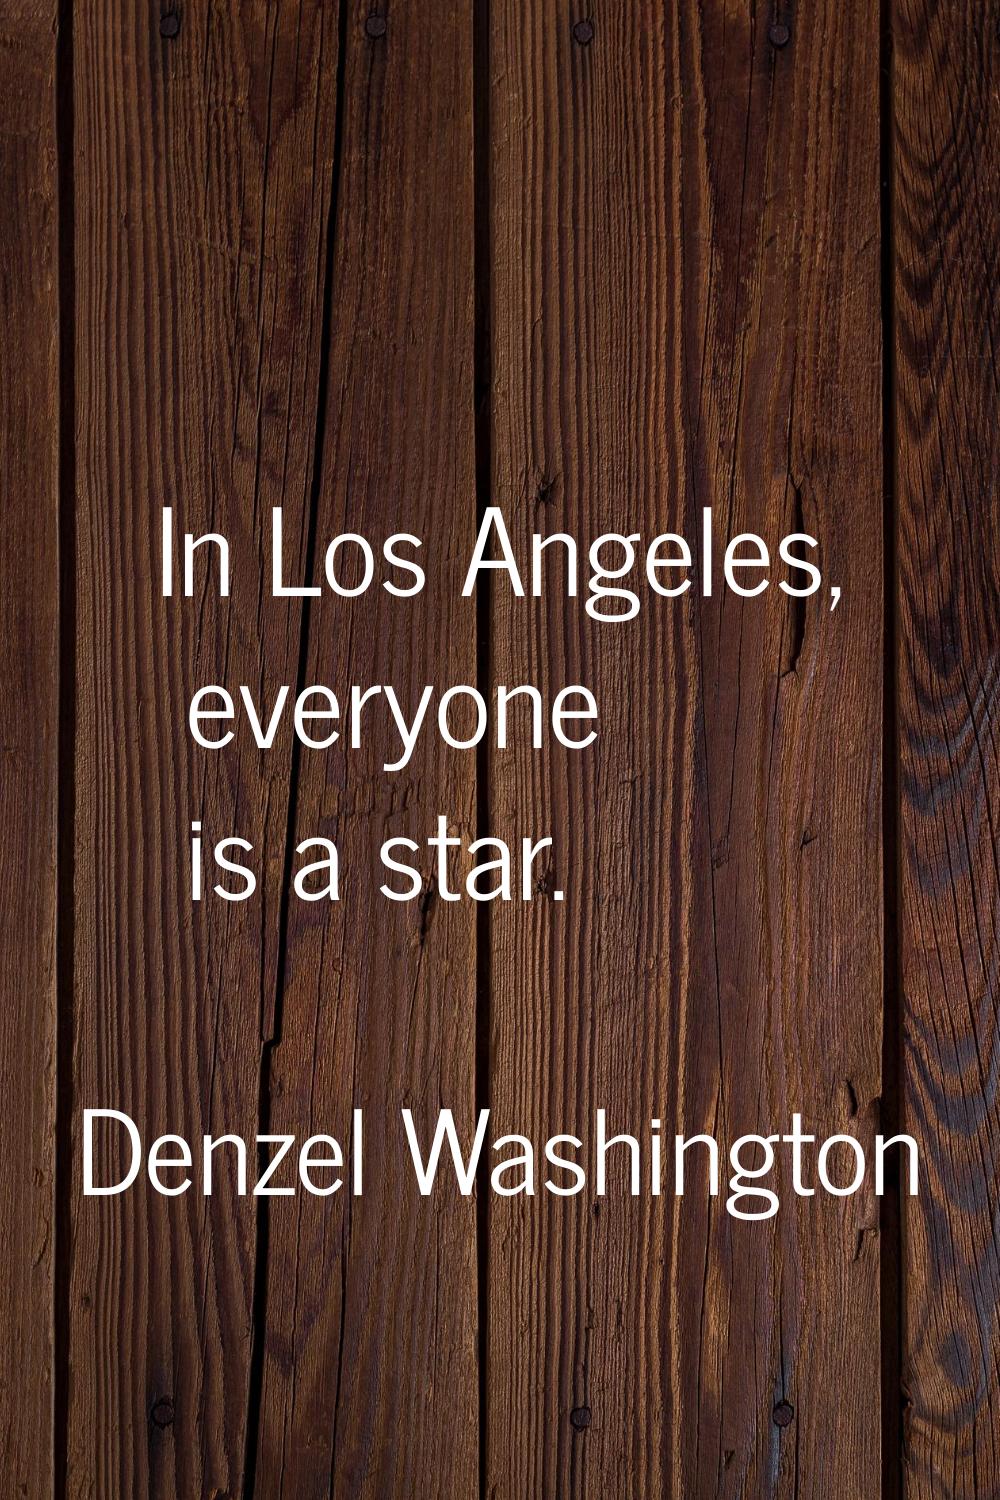 In Los Angeles, everyone is a star.